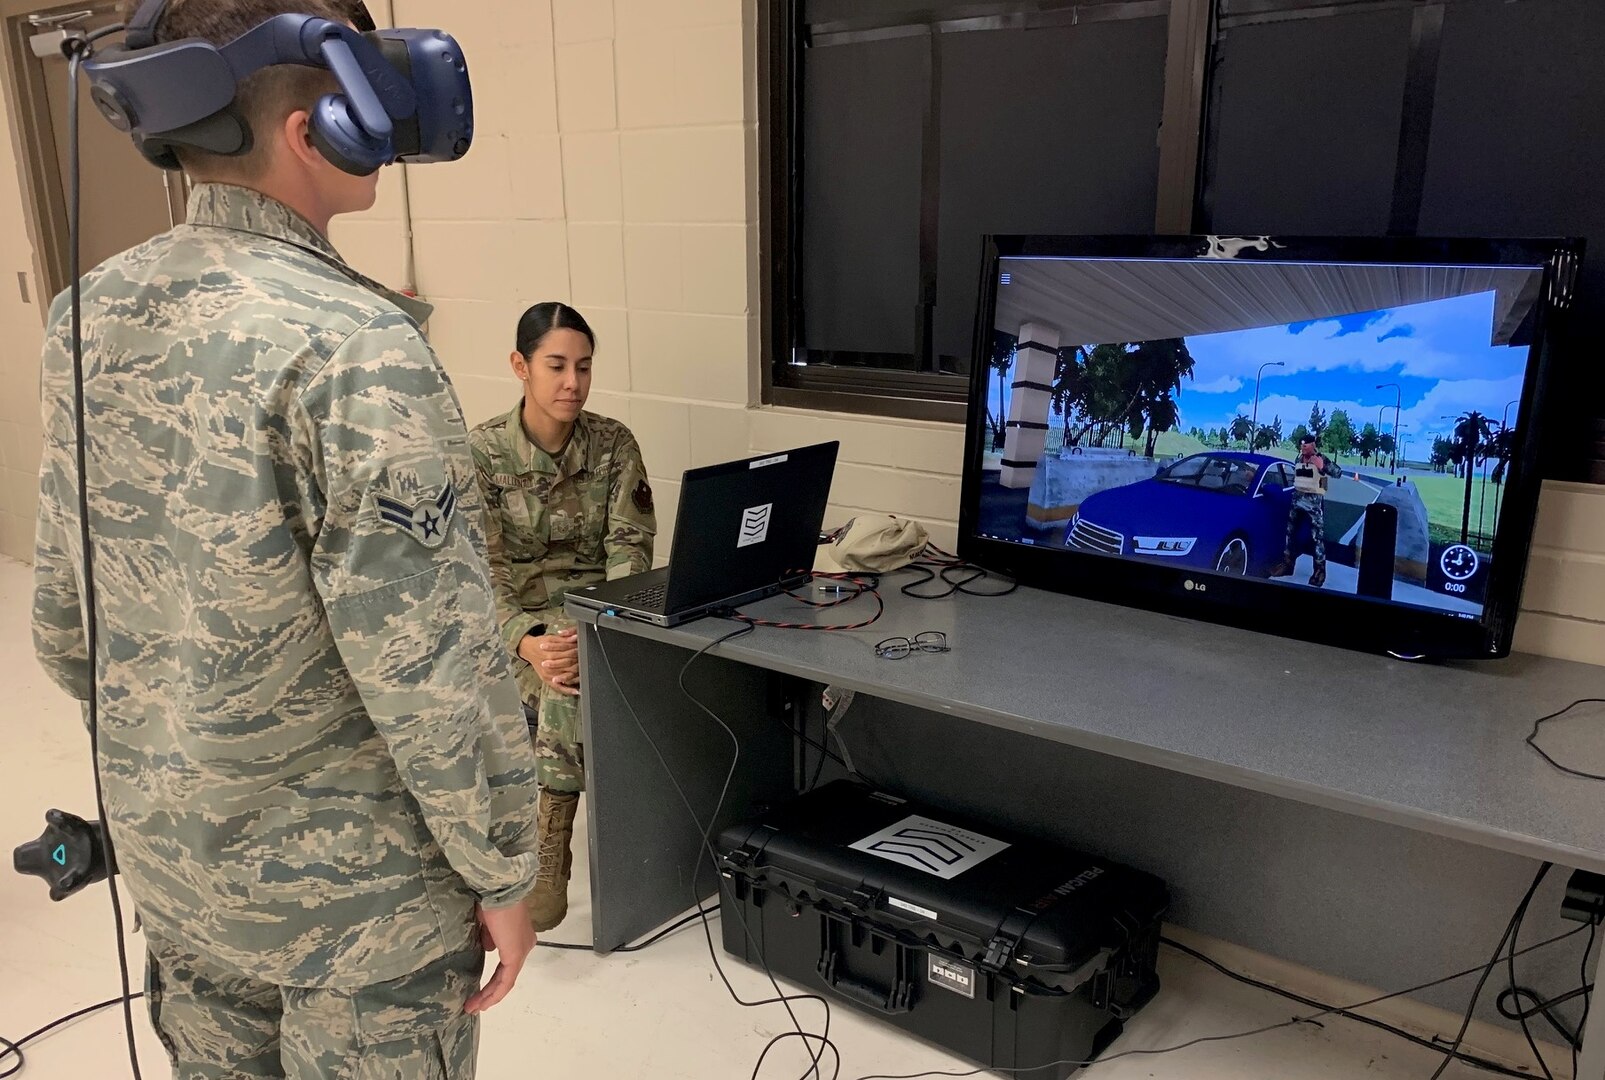 Airman 1st Class Taylor Waldron, a recent graduate of the Security Forces apprentice course, participates in a use of force training scenario in virtual reality environment simulator as Staff Sgt. Marcia Maldonado, 343rd Training Squadron instructor, facilitates training at Joint Base San Antonio-Lackland May 29. The 343rd Training Squadron has added the VR training simulators as part of a beta-test in conjunction with a civilian vendor at no cost to the unit through a partnership with AFWERX.